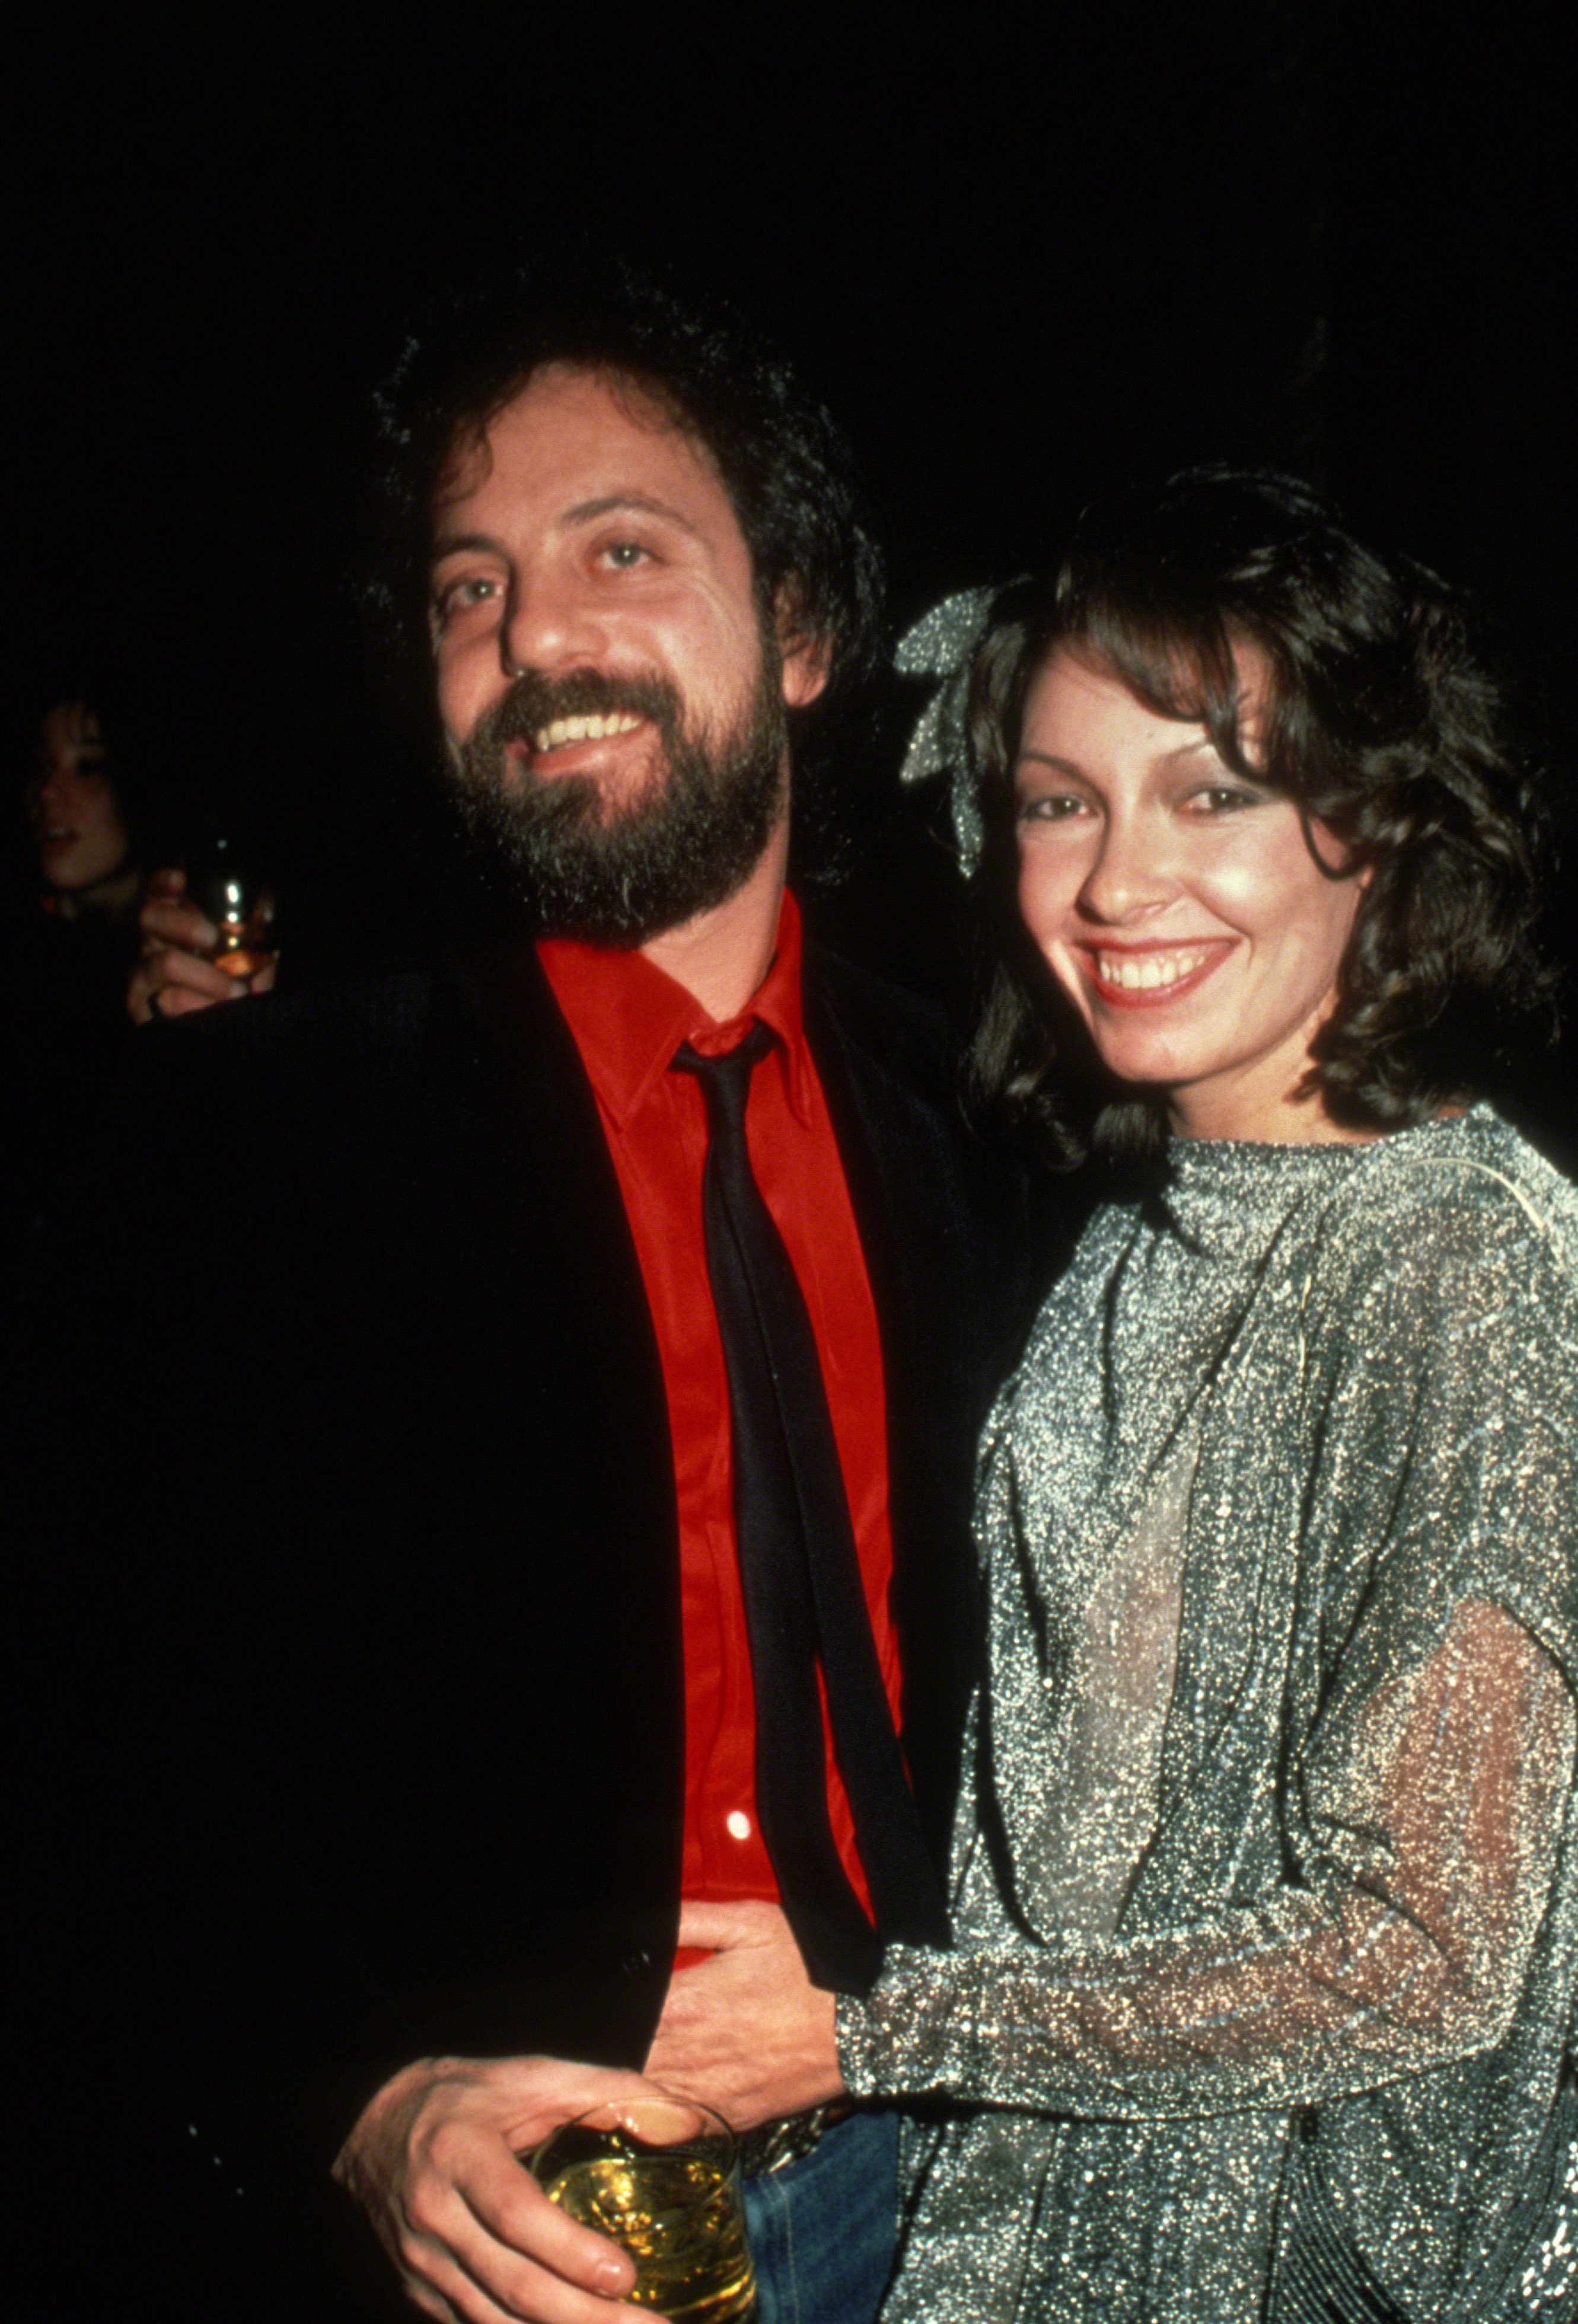 Billy Joel pictured with spouse and manager Elizabeth Weber in 1981 in New York City. / Source: Getty Images